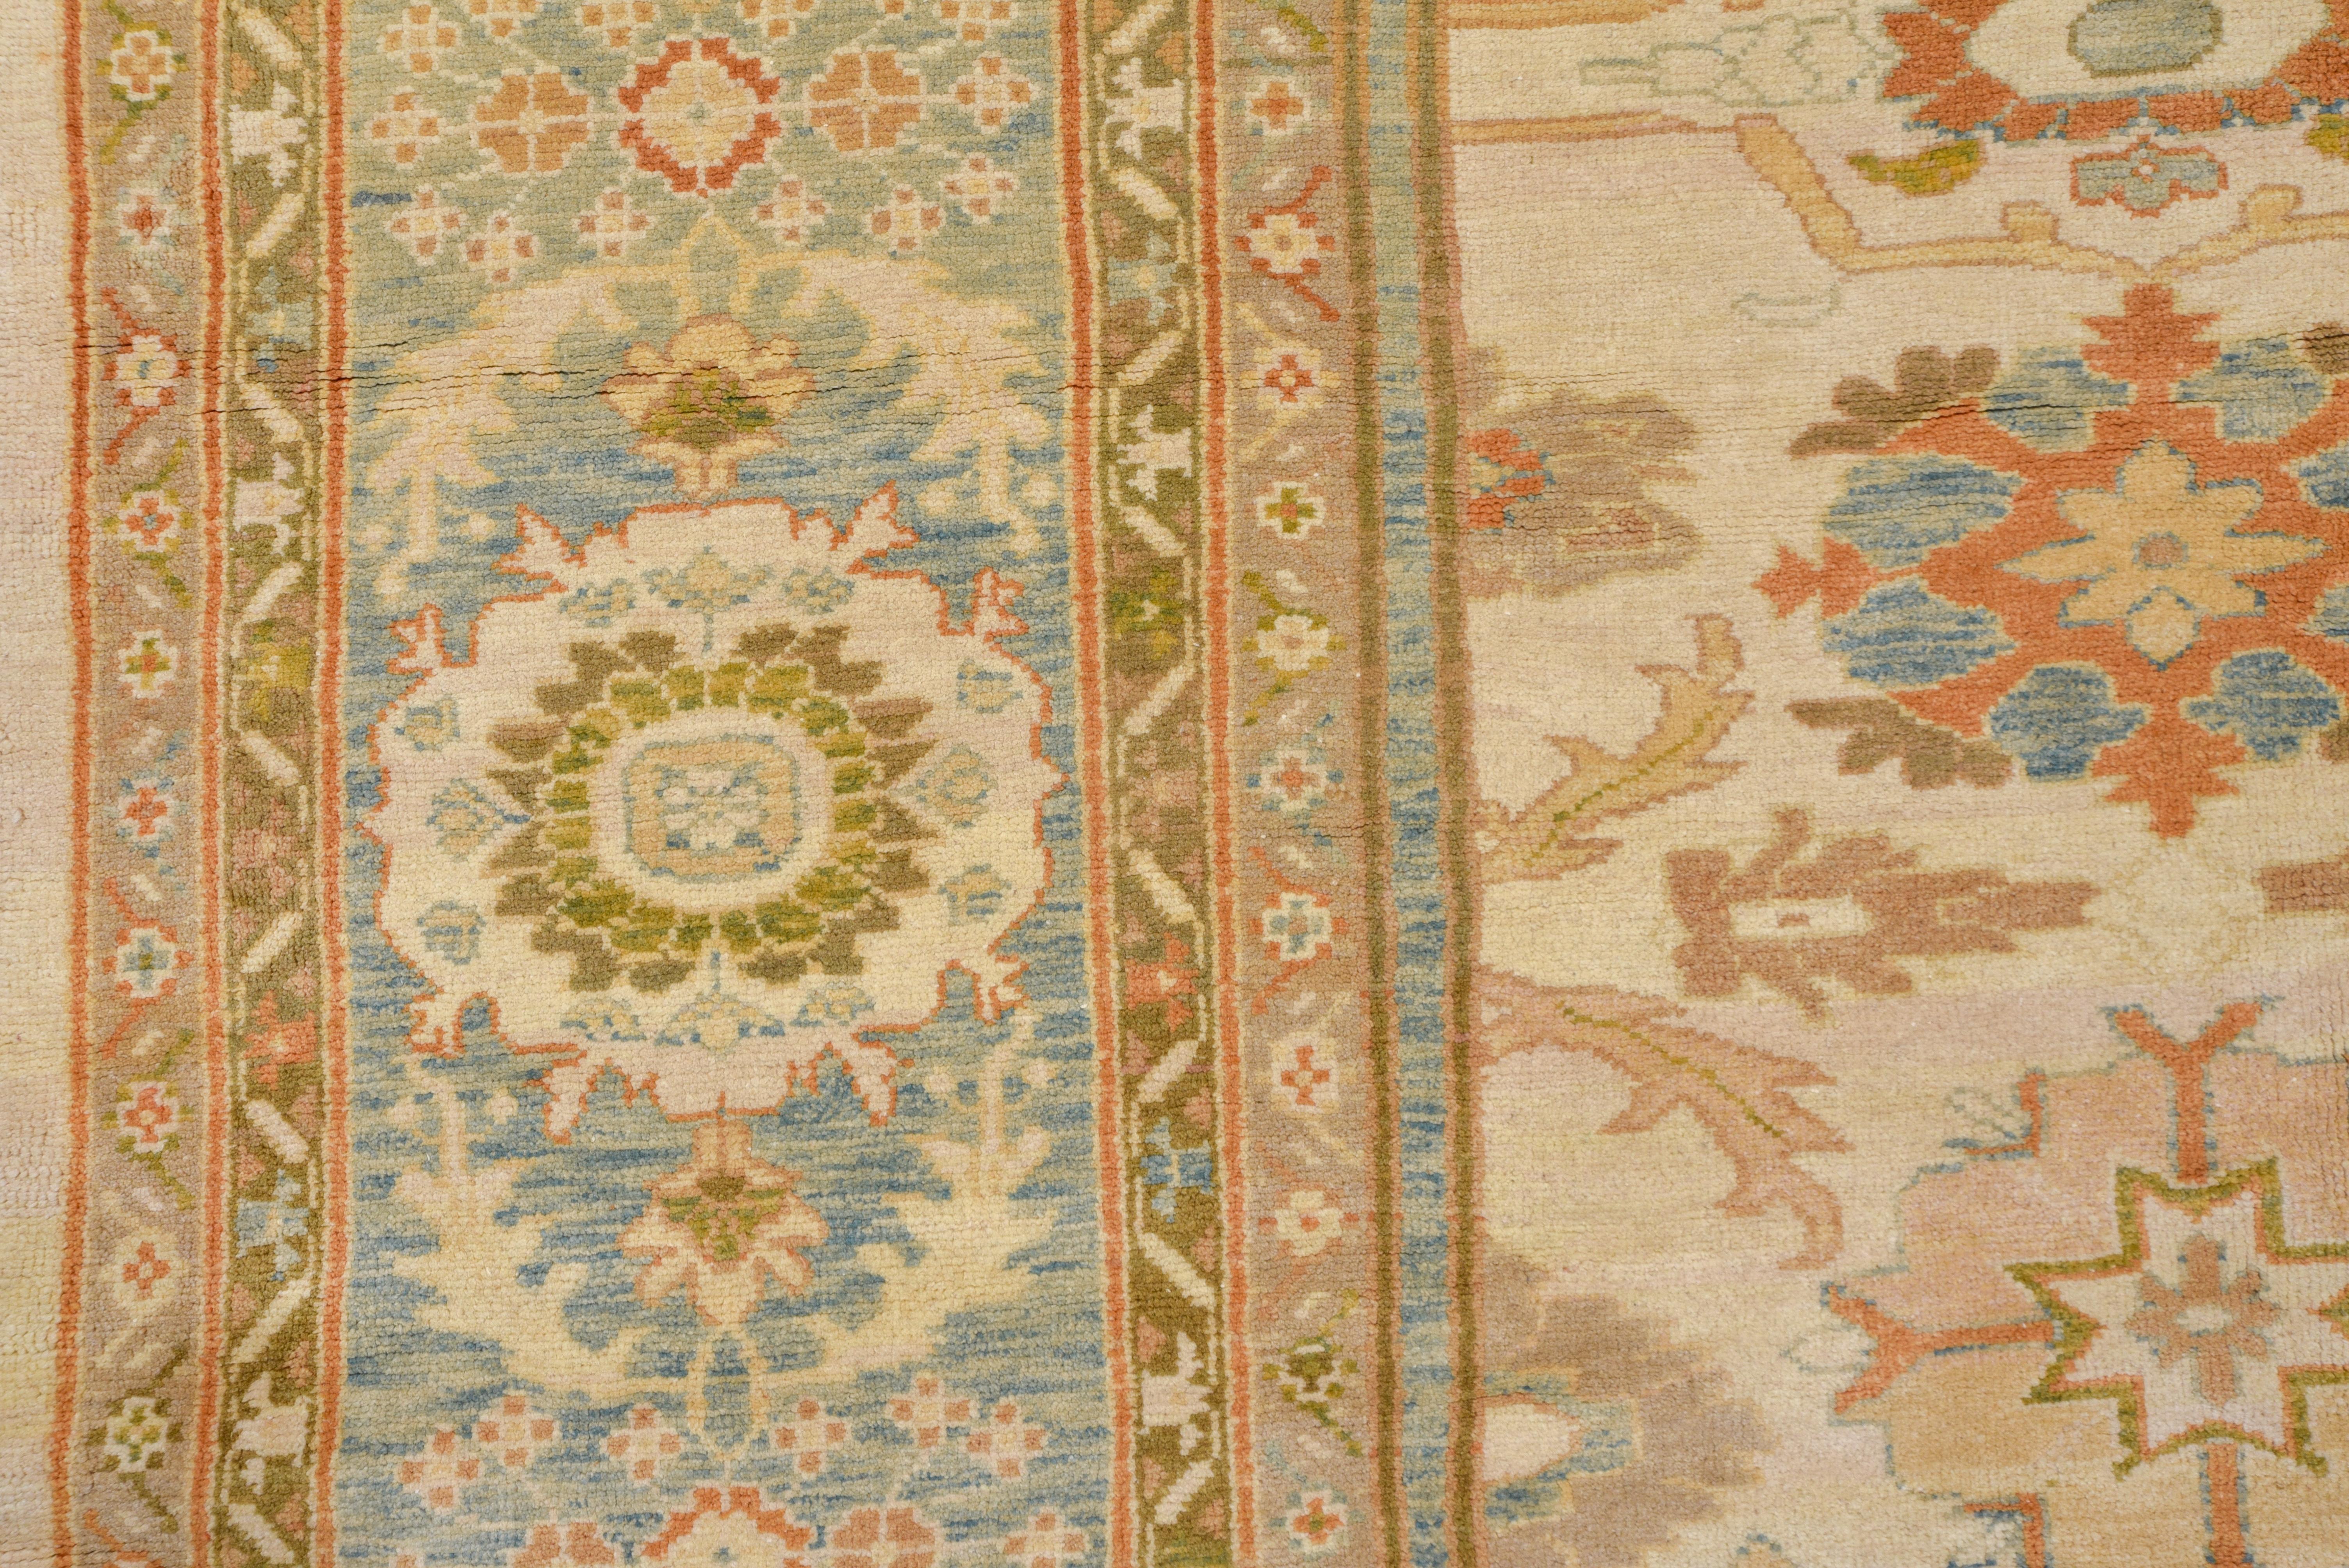 This as new Sultanabad-style carpet shows a cream field supporting a repeating, allover pattern of boteh-petal rosettes, medallions centering thin crosses and a number of other motives familiar from antique carpets. The very pale blue border rust